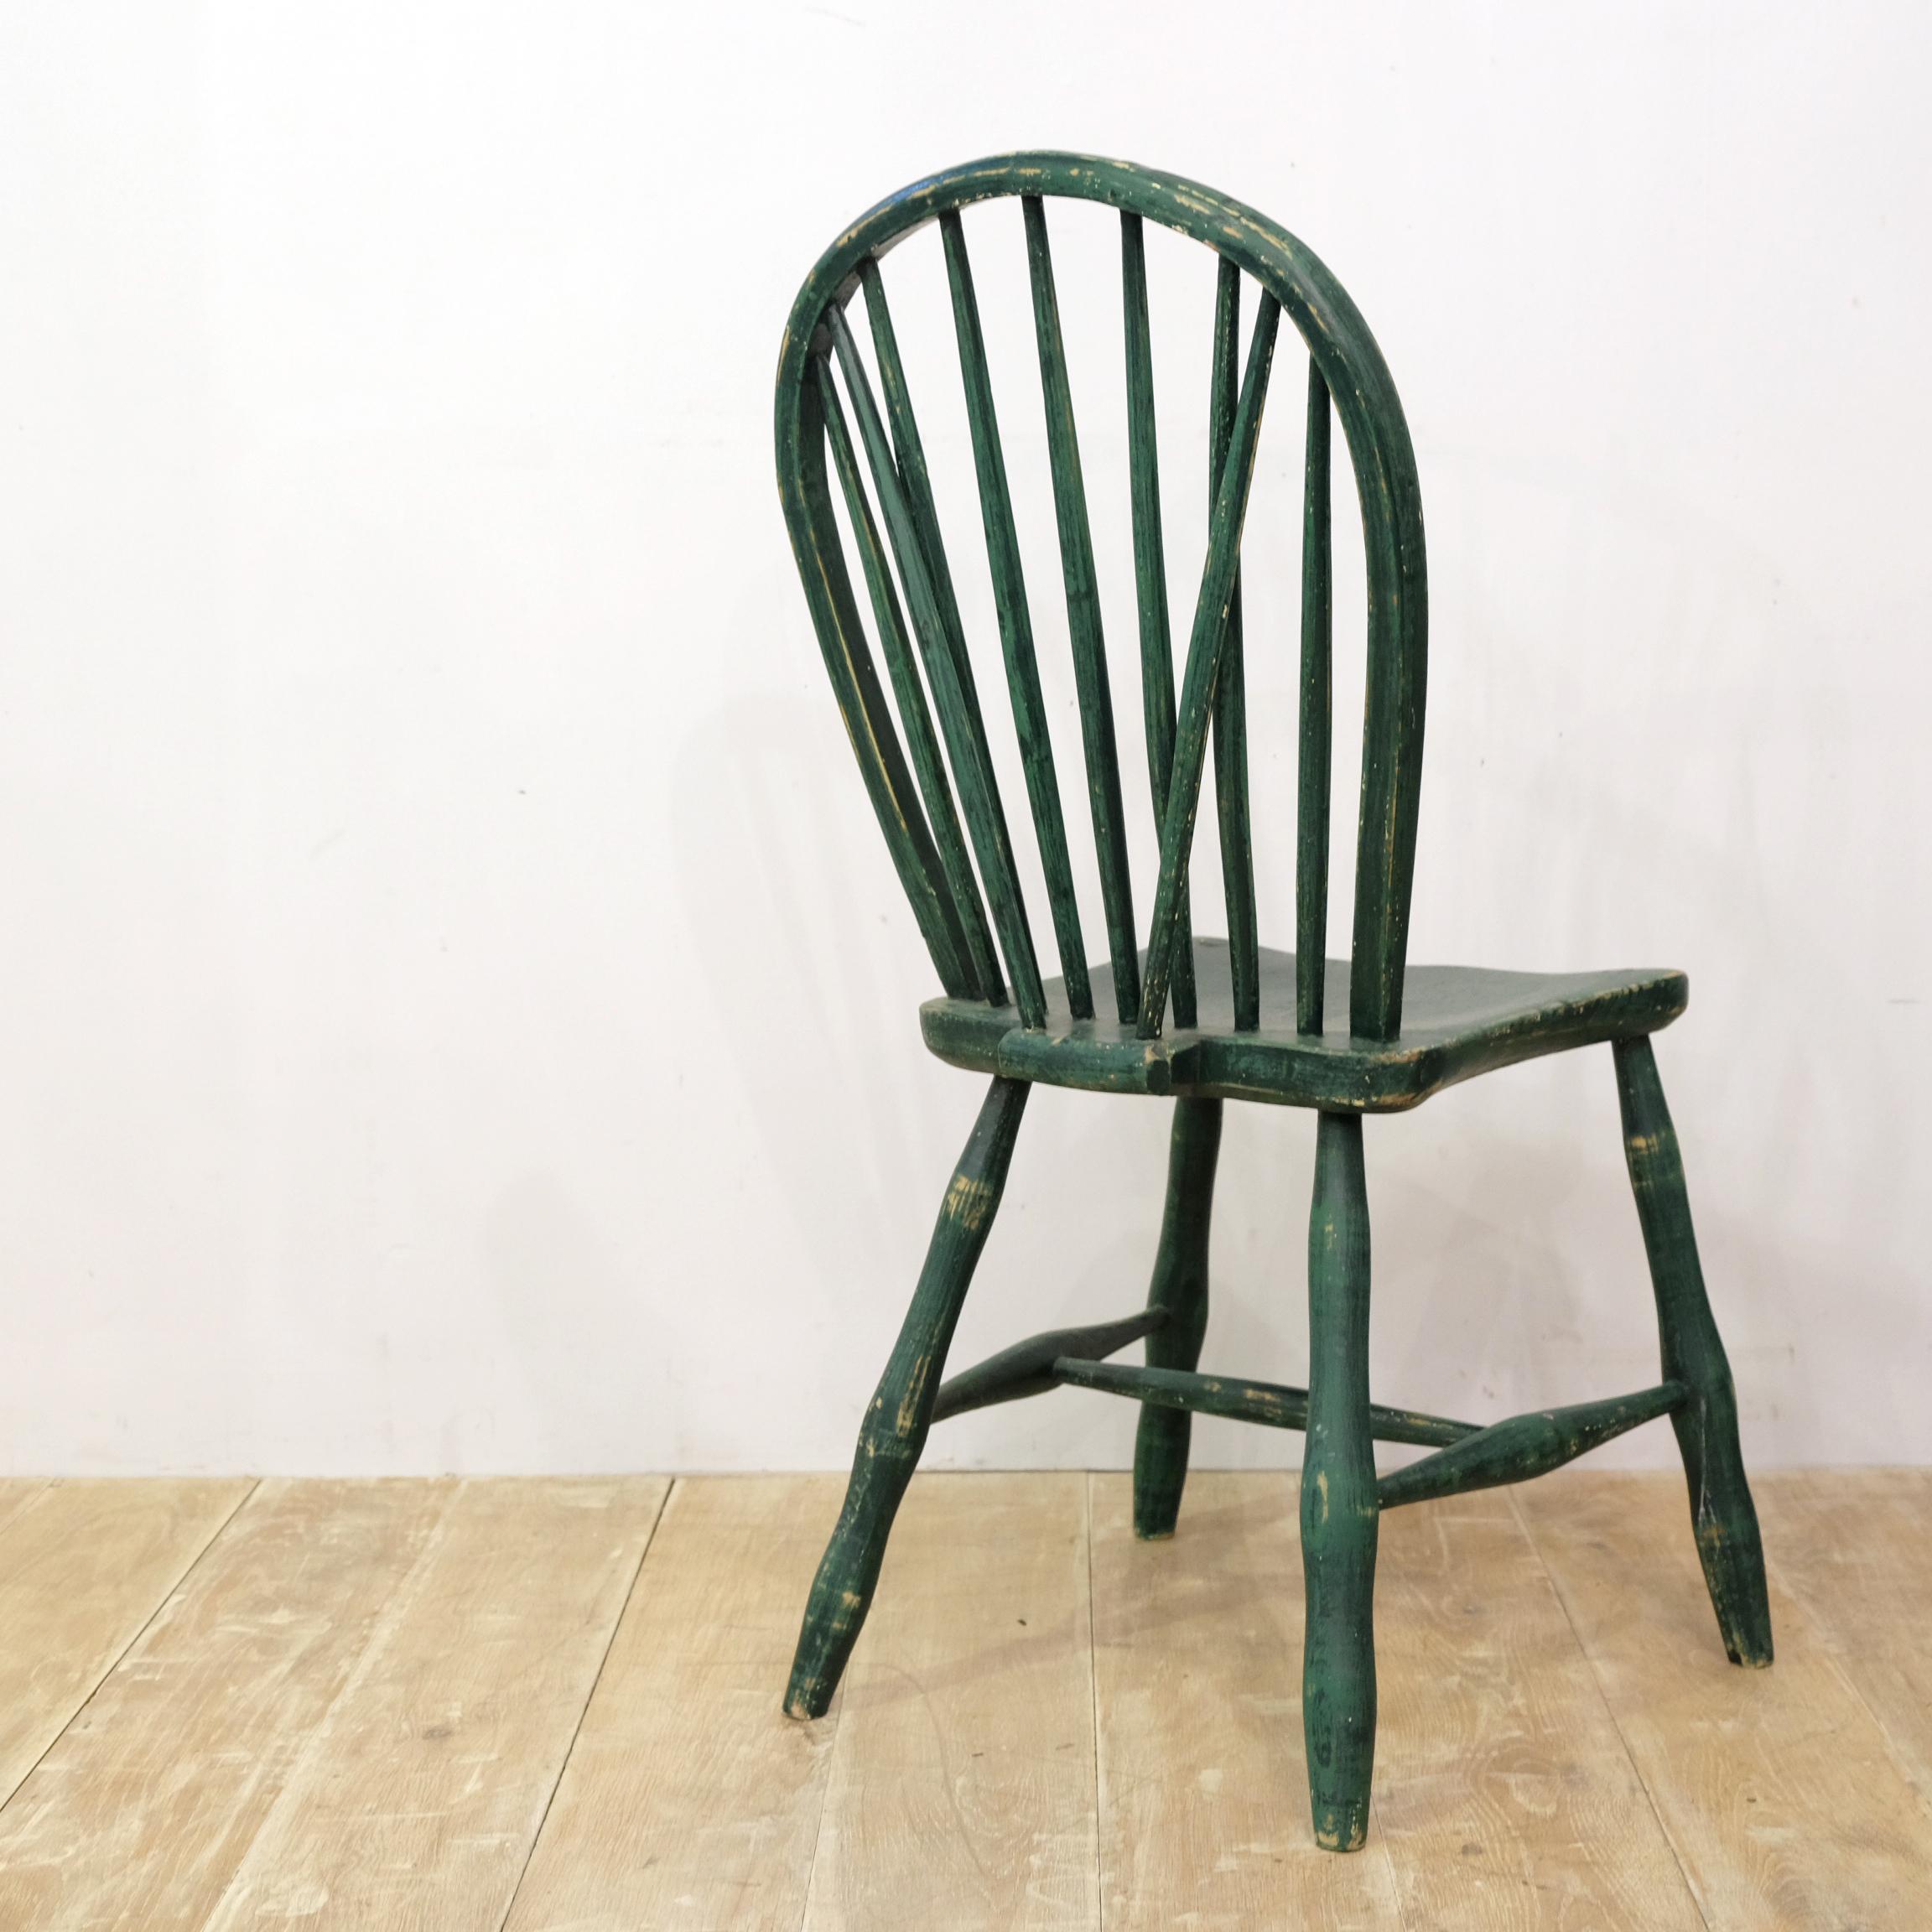 Hand-Carved Yealmpton Side Chair, Old Green Paint, English, West Country, 1820s, Country